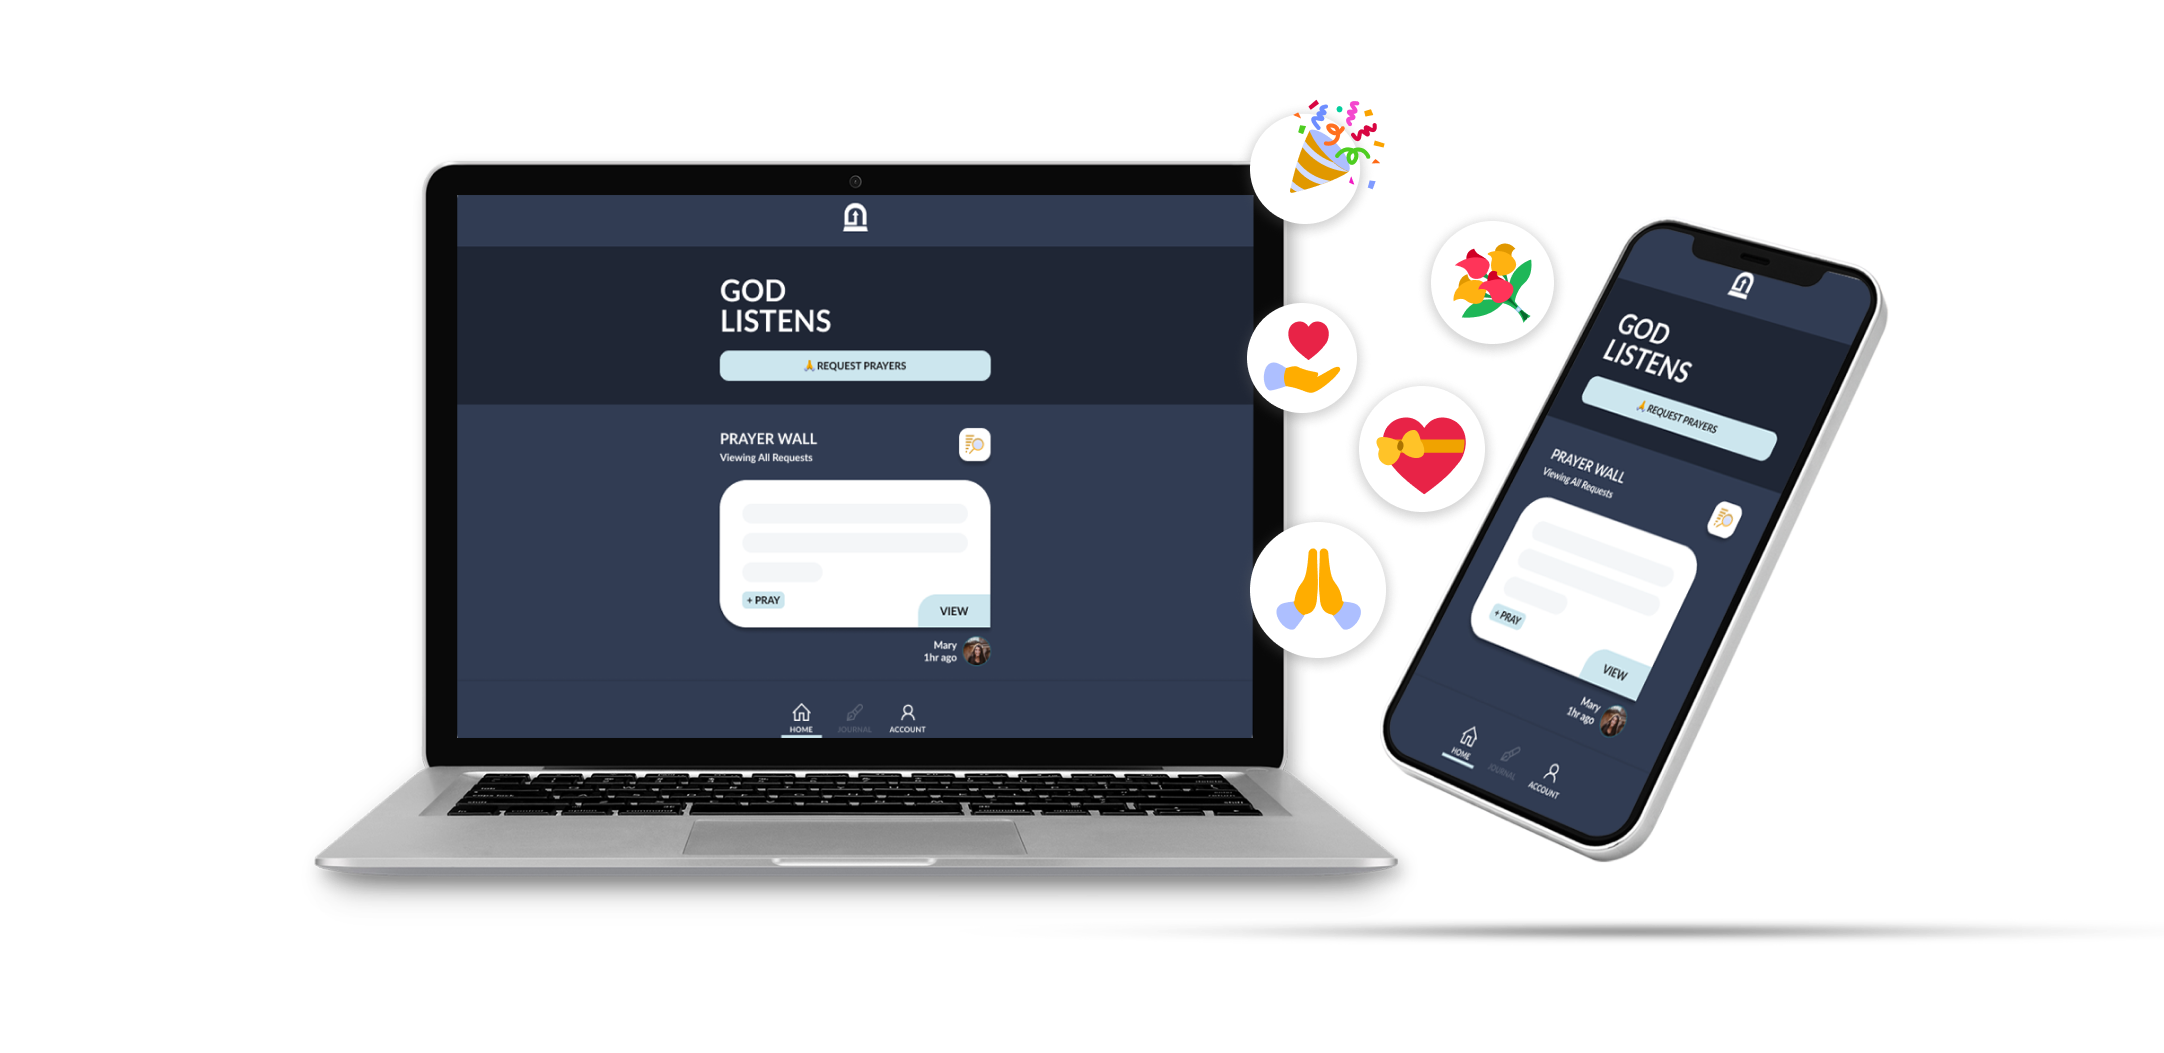 A laptop and mobile phone showing the God Listens app